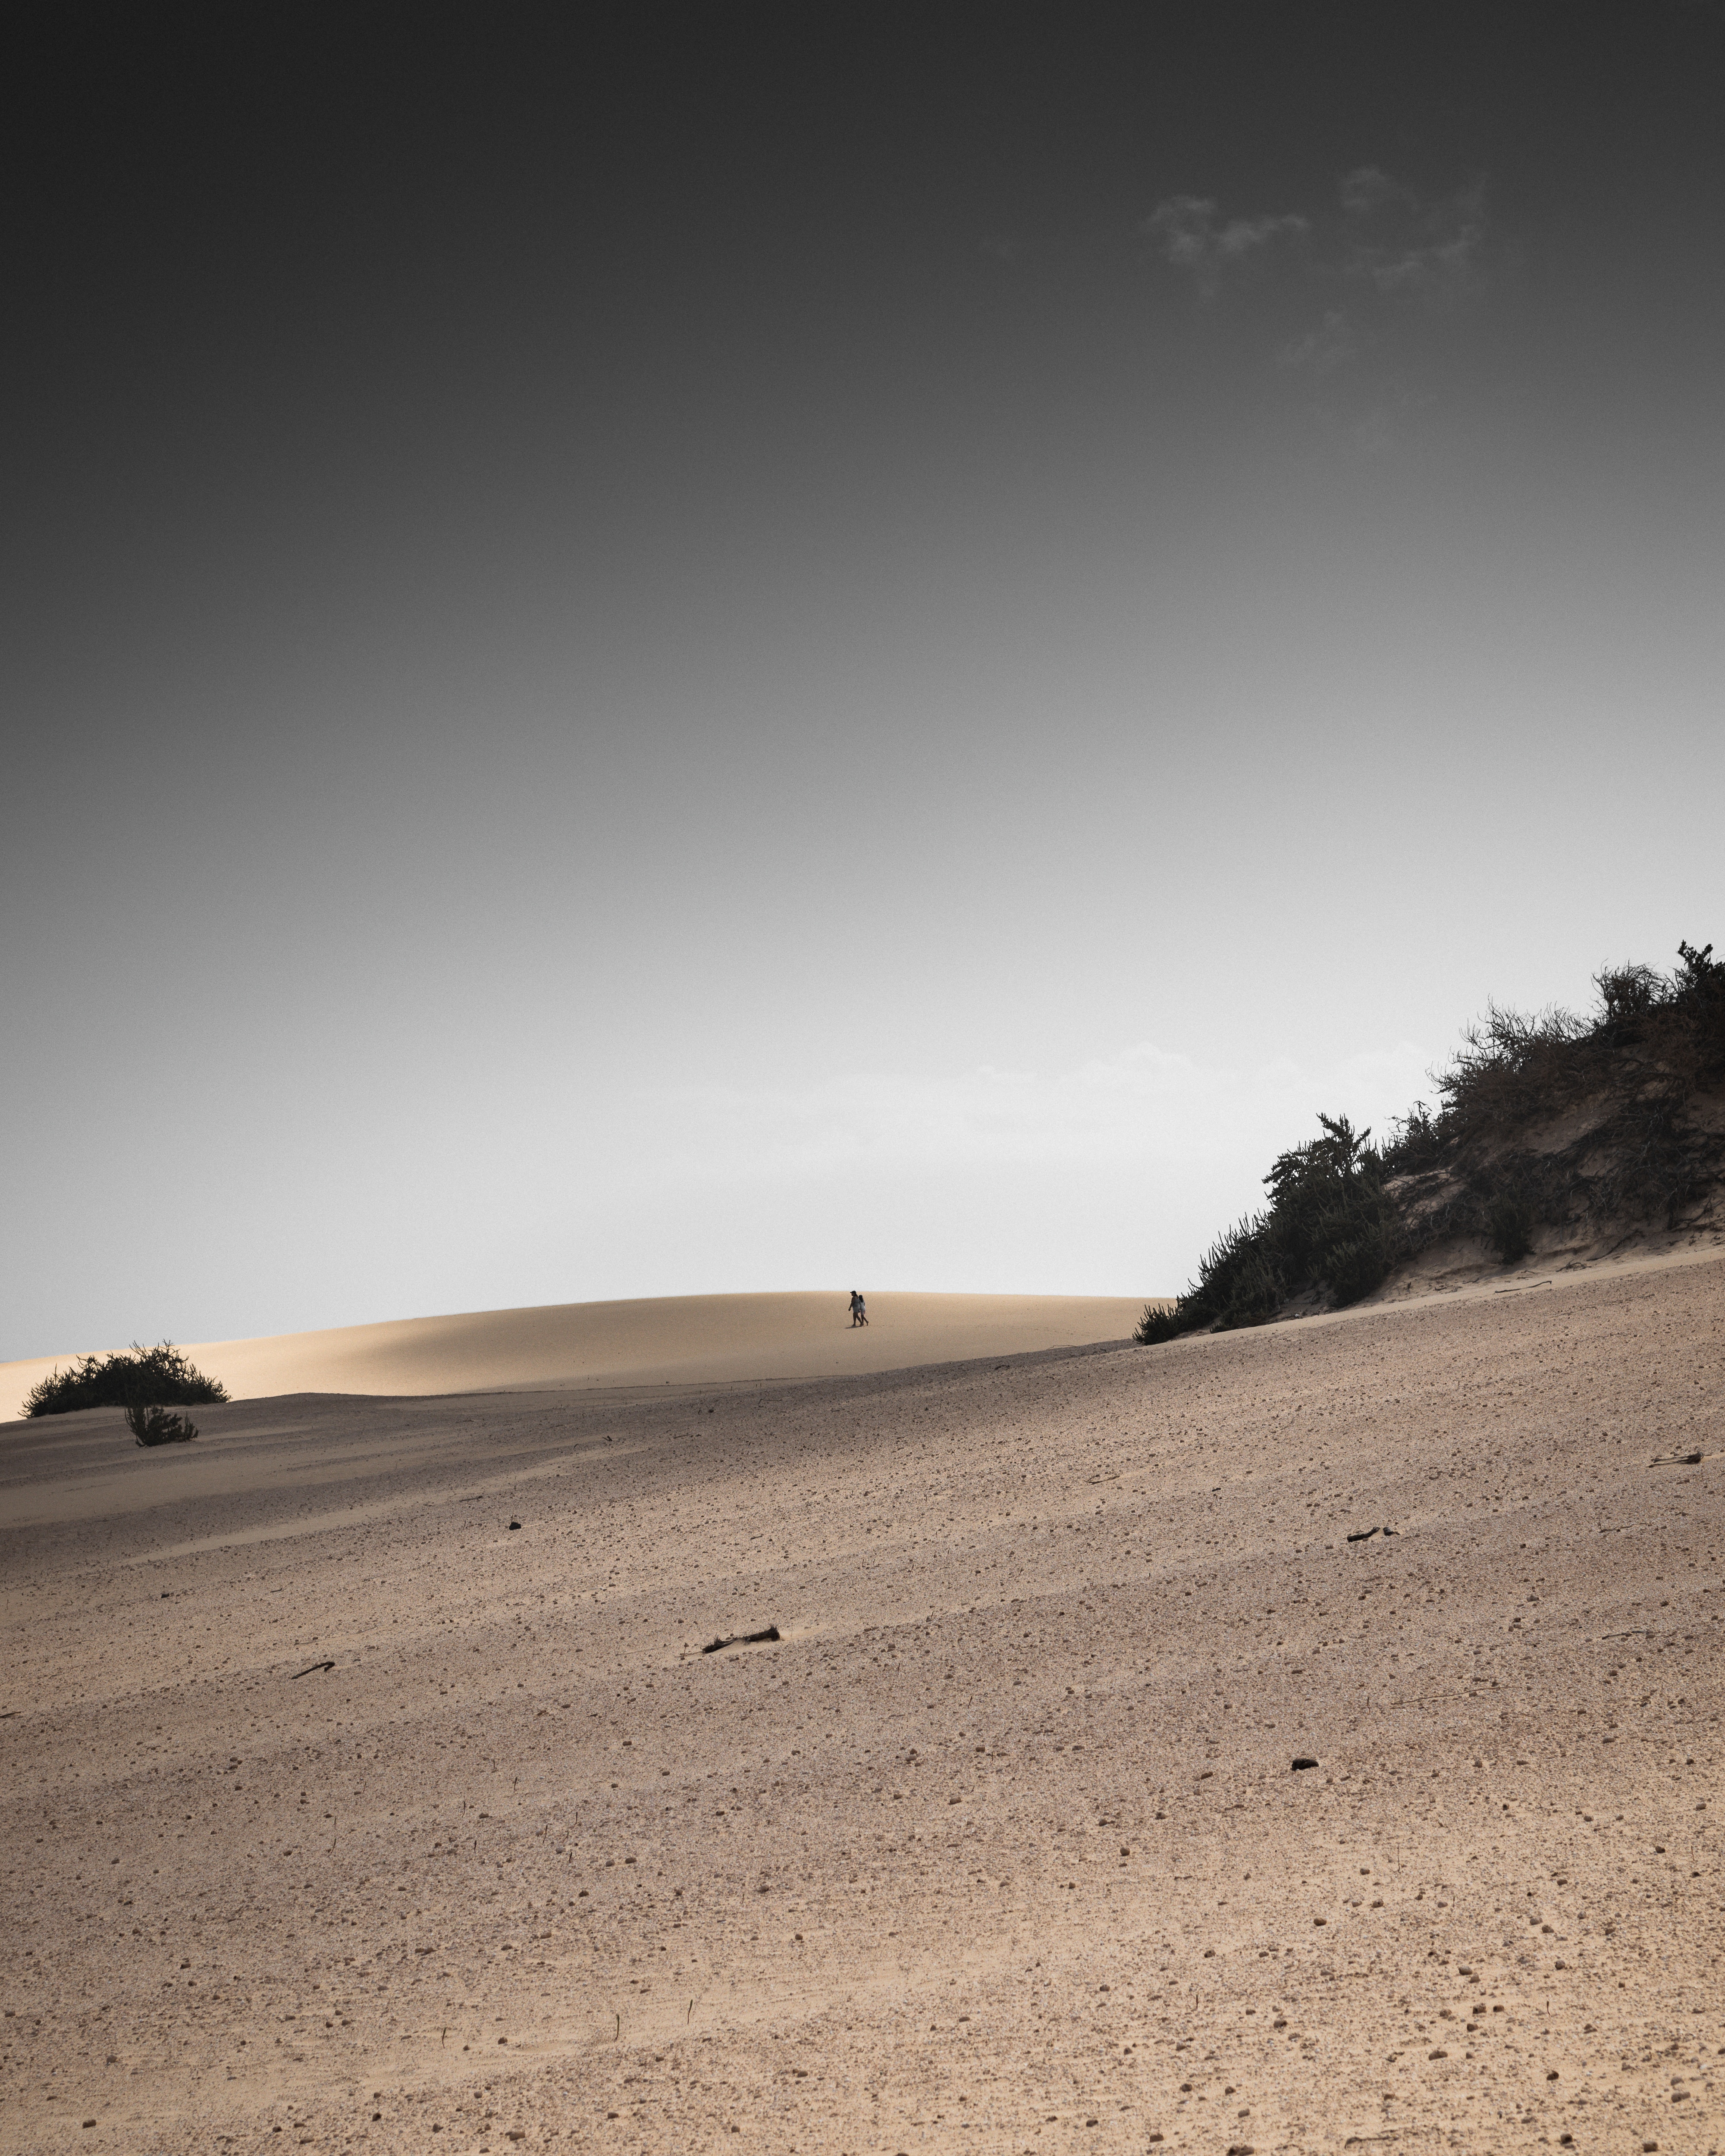 desert, landscape, nature, sand, silhouettes, hilly wallpapers for tablet